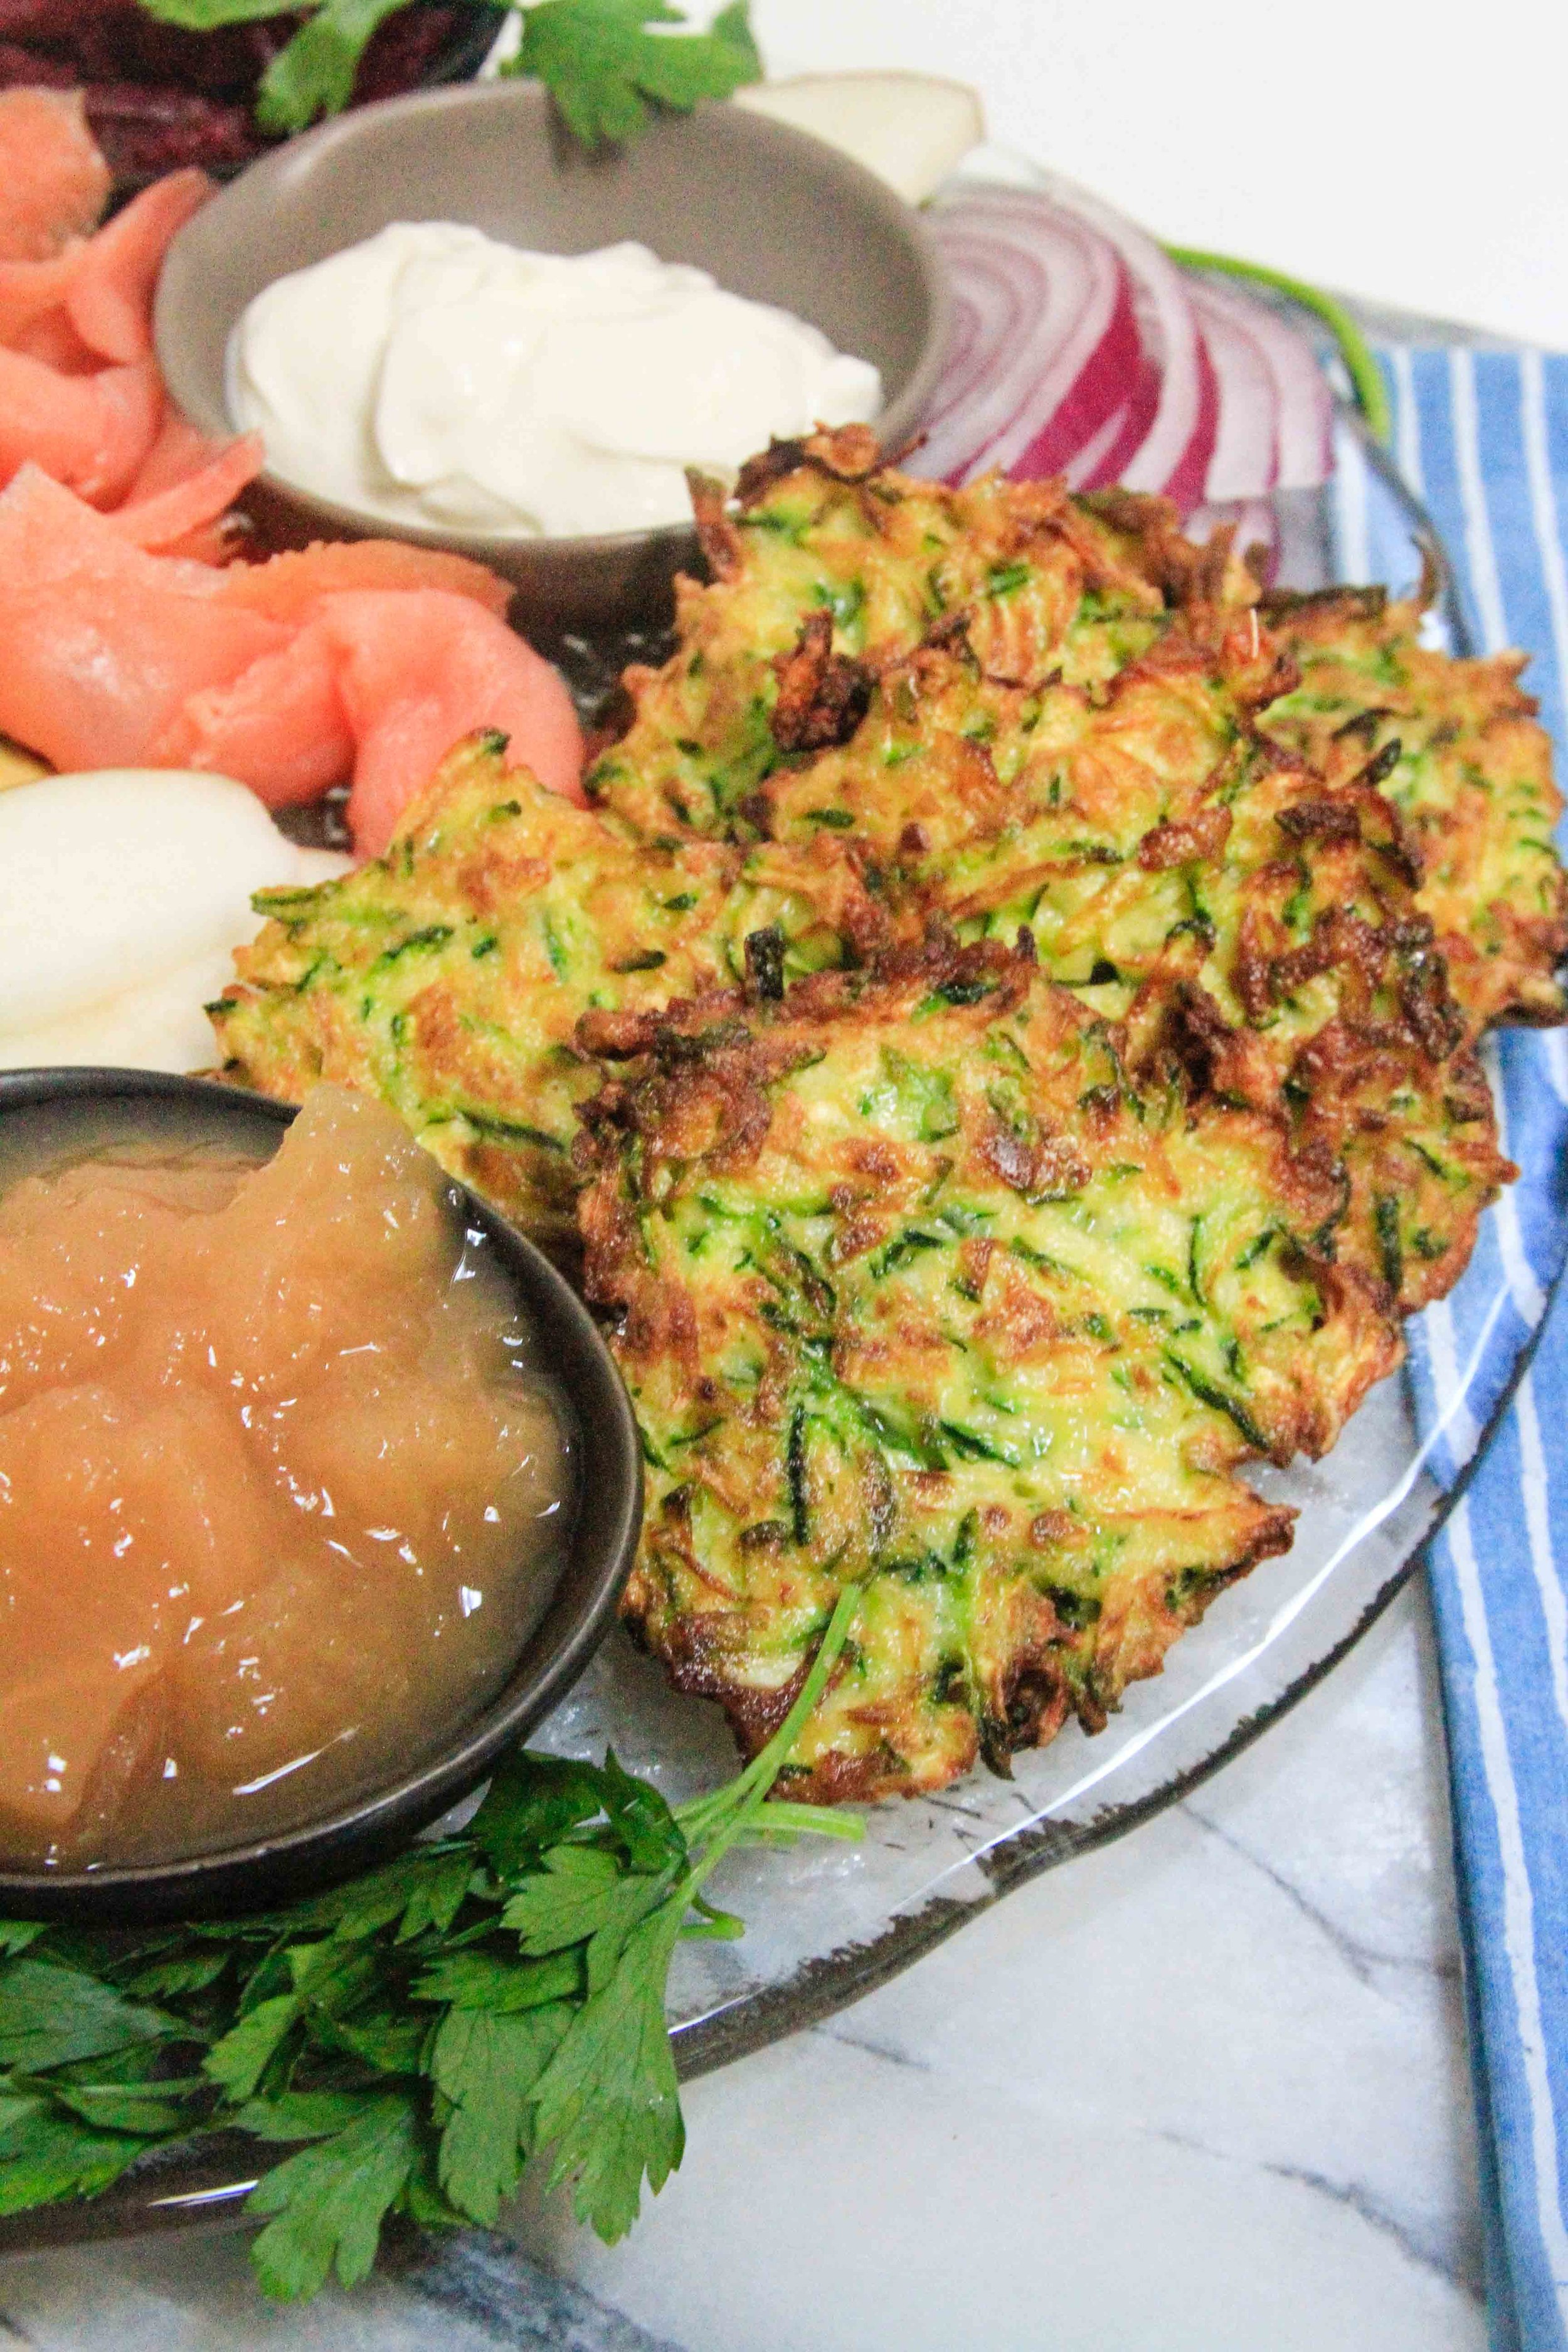 Make your own latke party